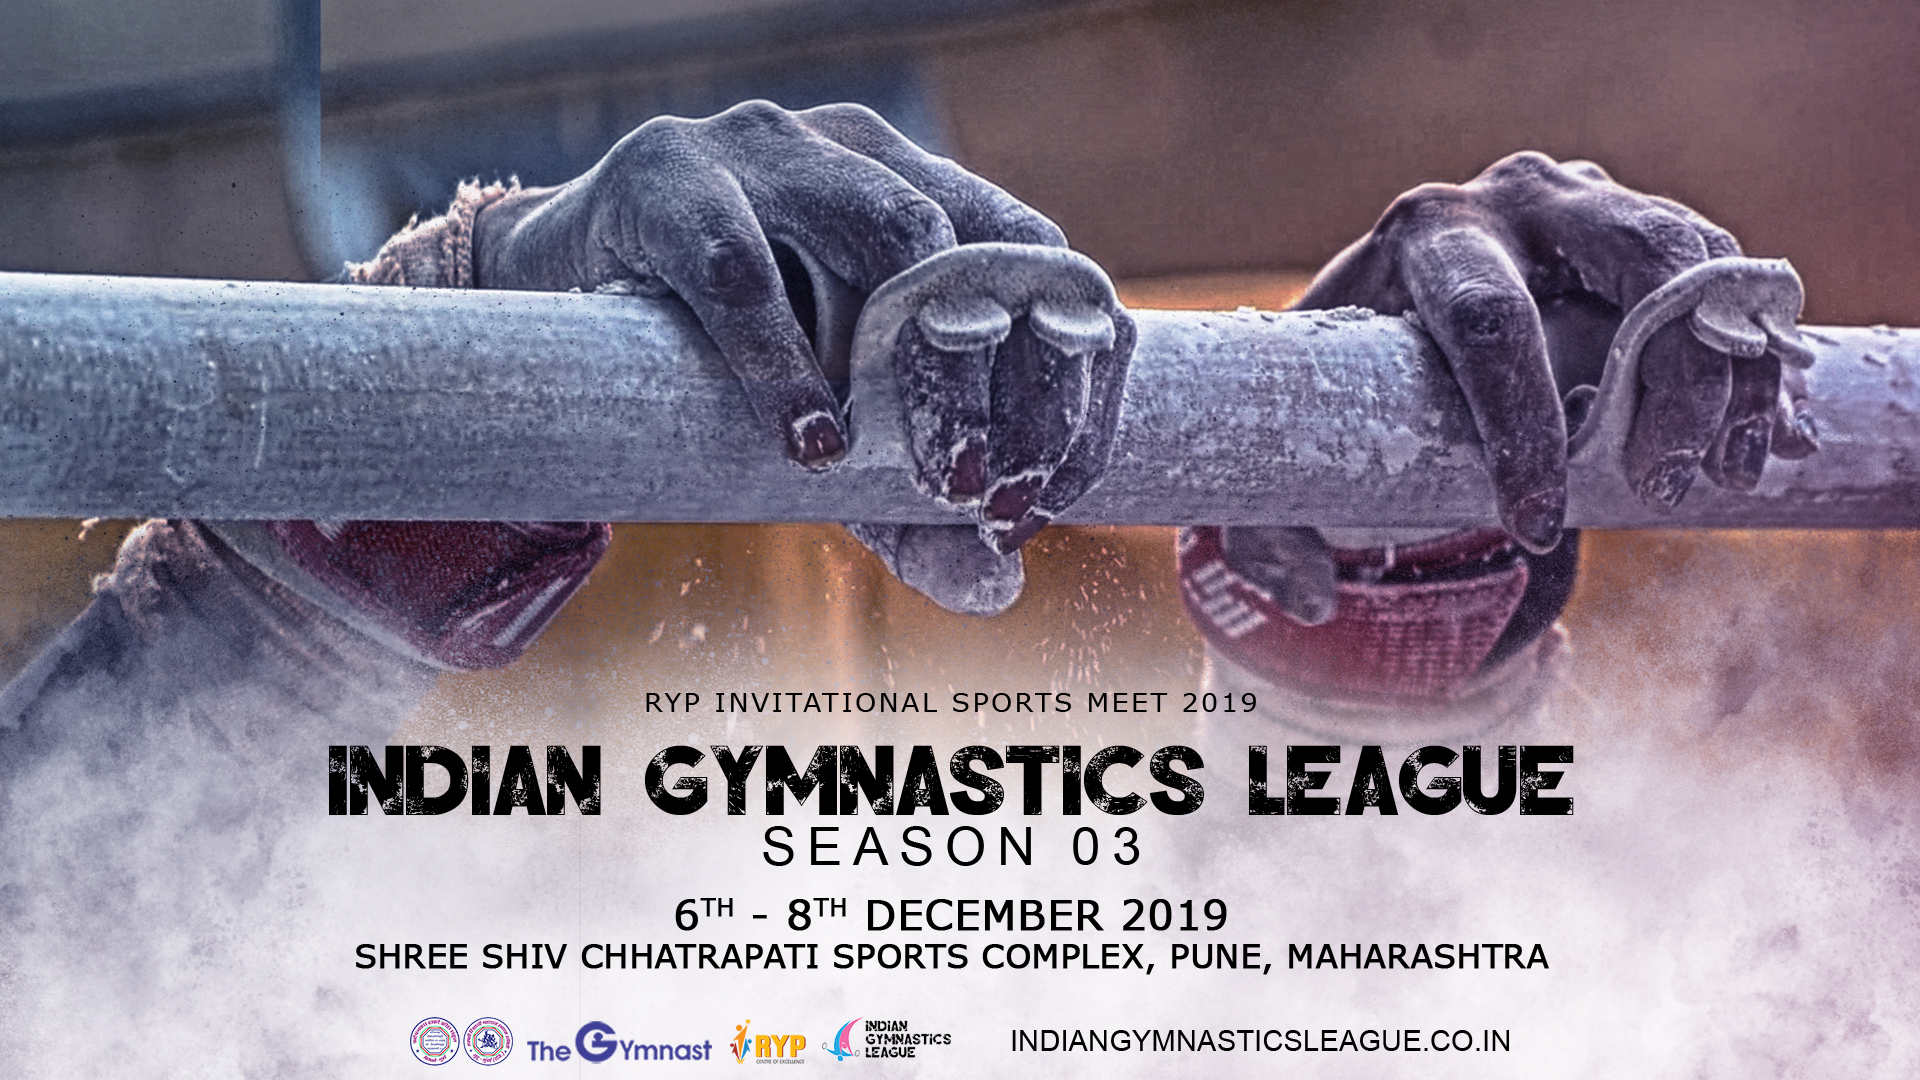 Bigger, better and the finest it has ever been! Indian Gymnastics League Season 03